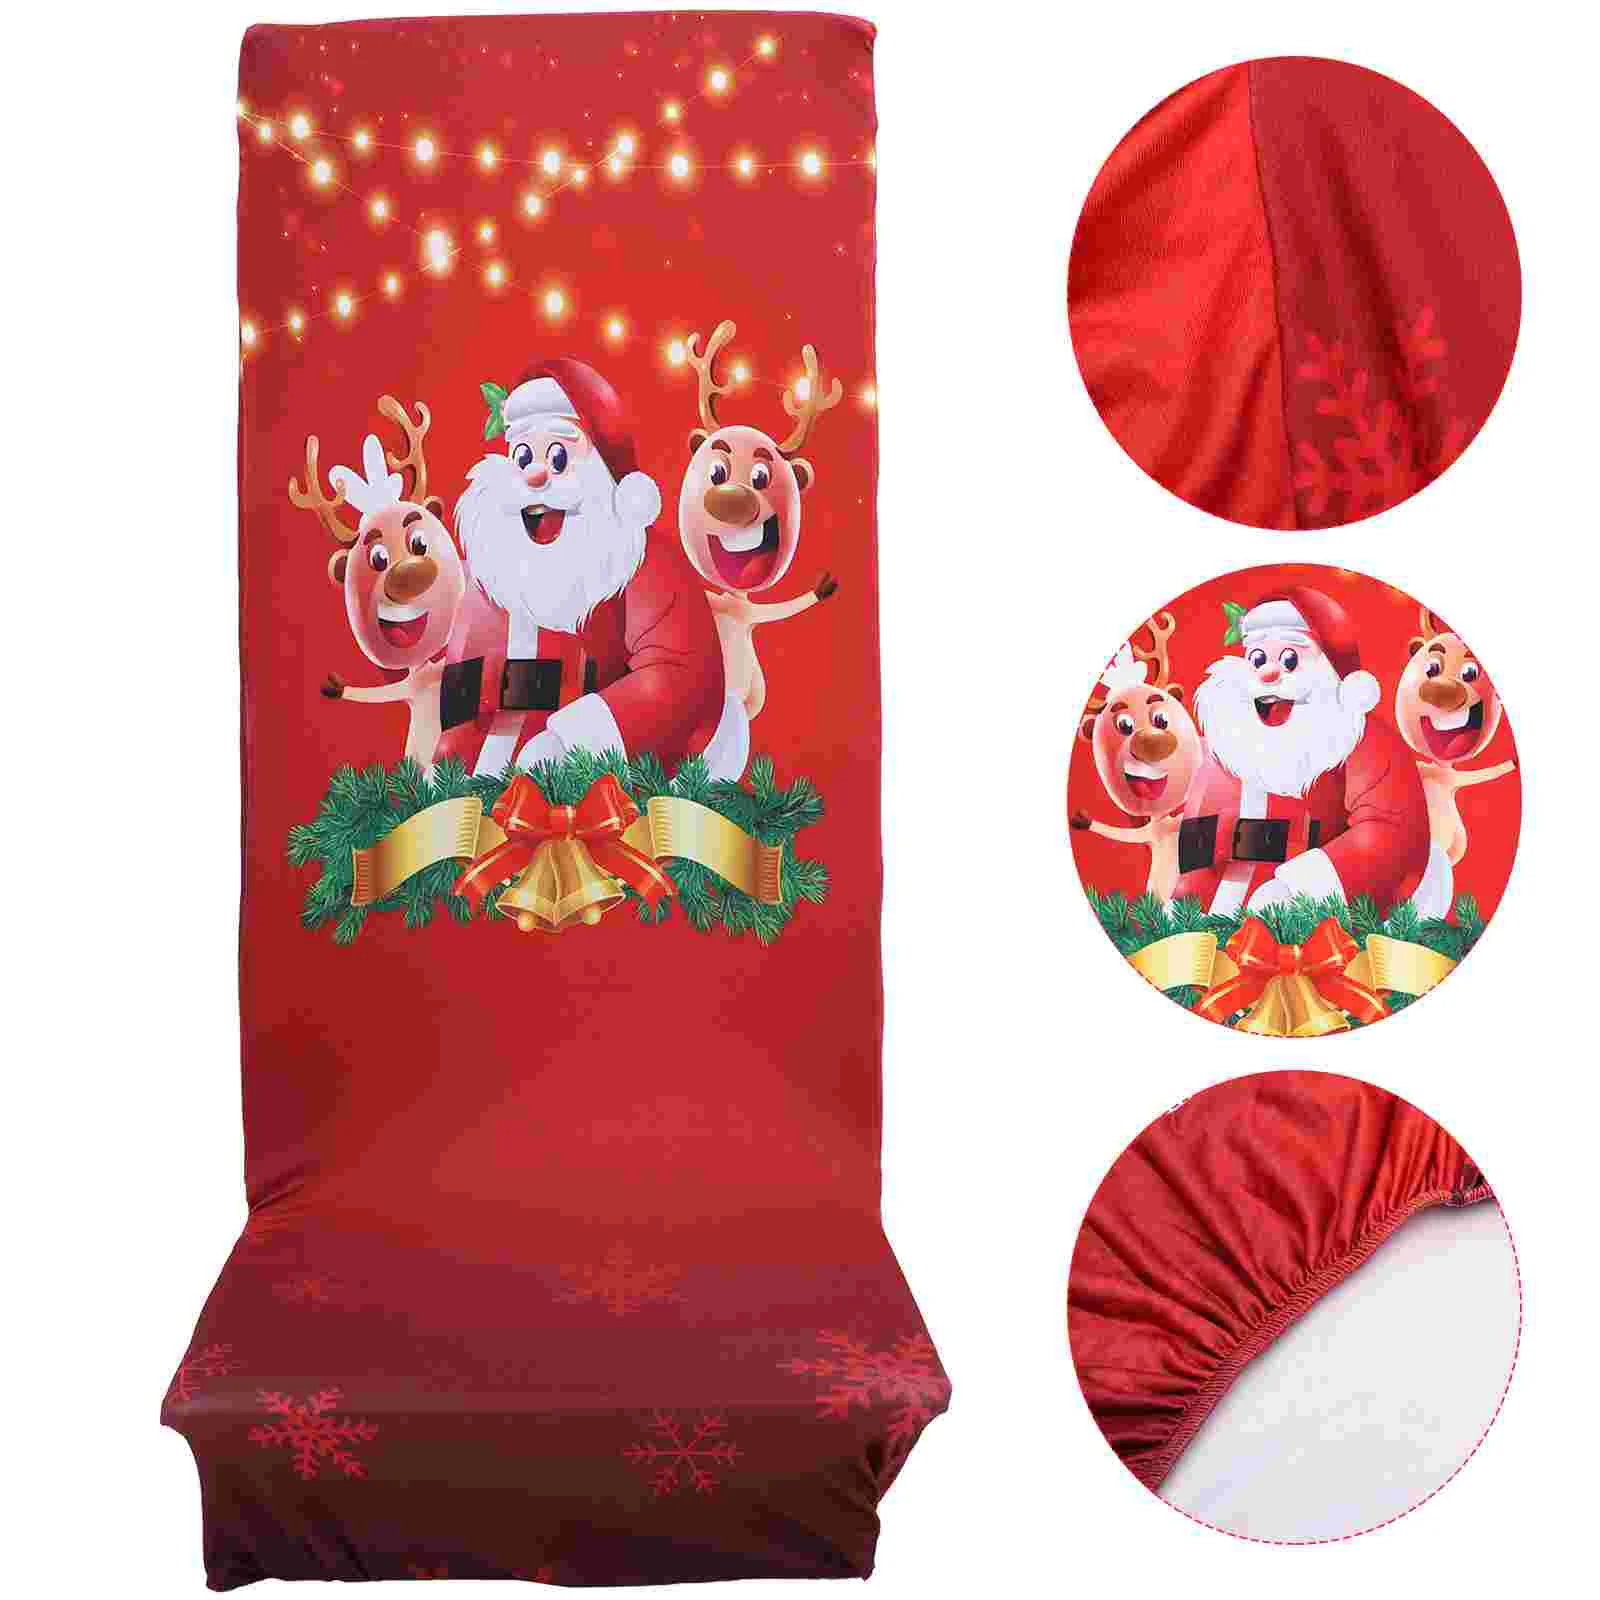 

Chair Christmas Covers Coverprotector Slipcovers Diningwrap Printed Chairs Clubcaps Snowman Cushion Red Seats Decor Holiday